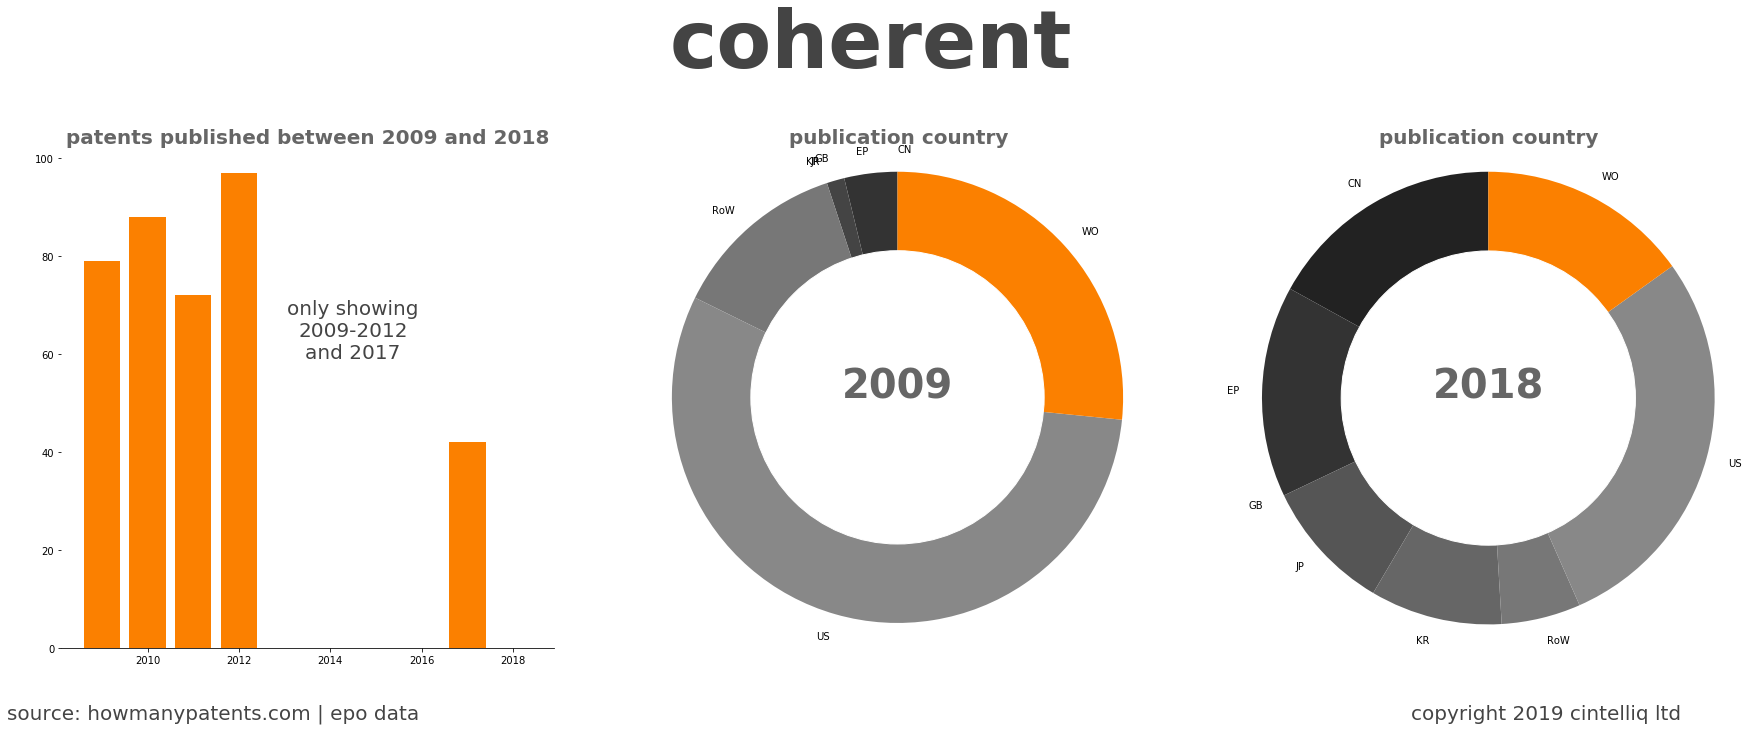 summary of patents for Coherent